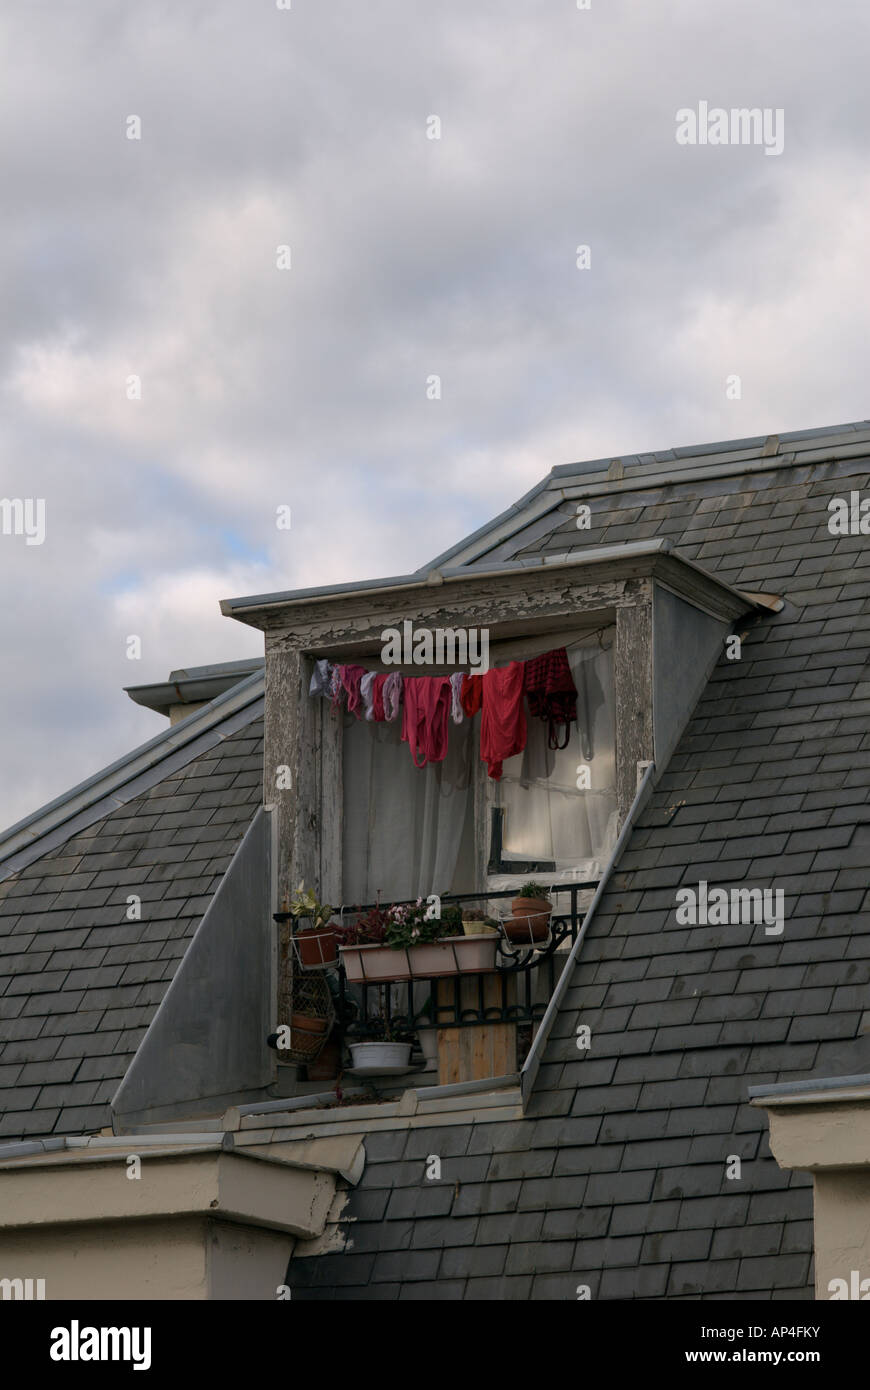 Laundry drying outside a garret room window Stock Photo